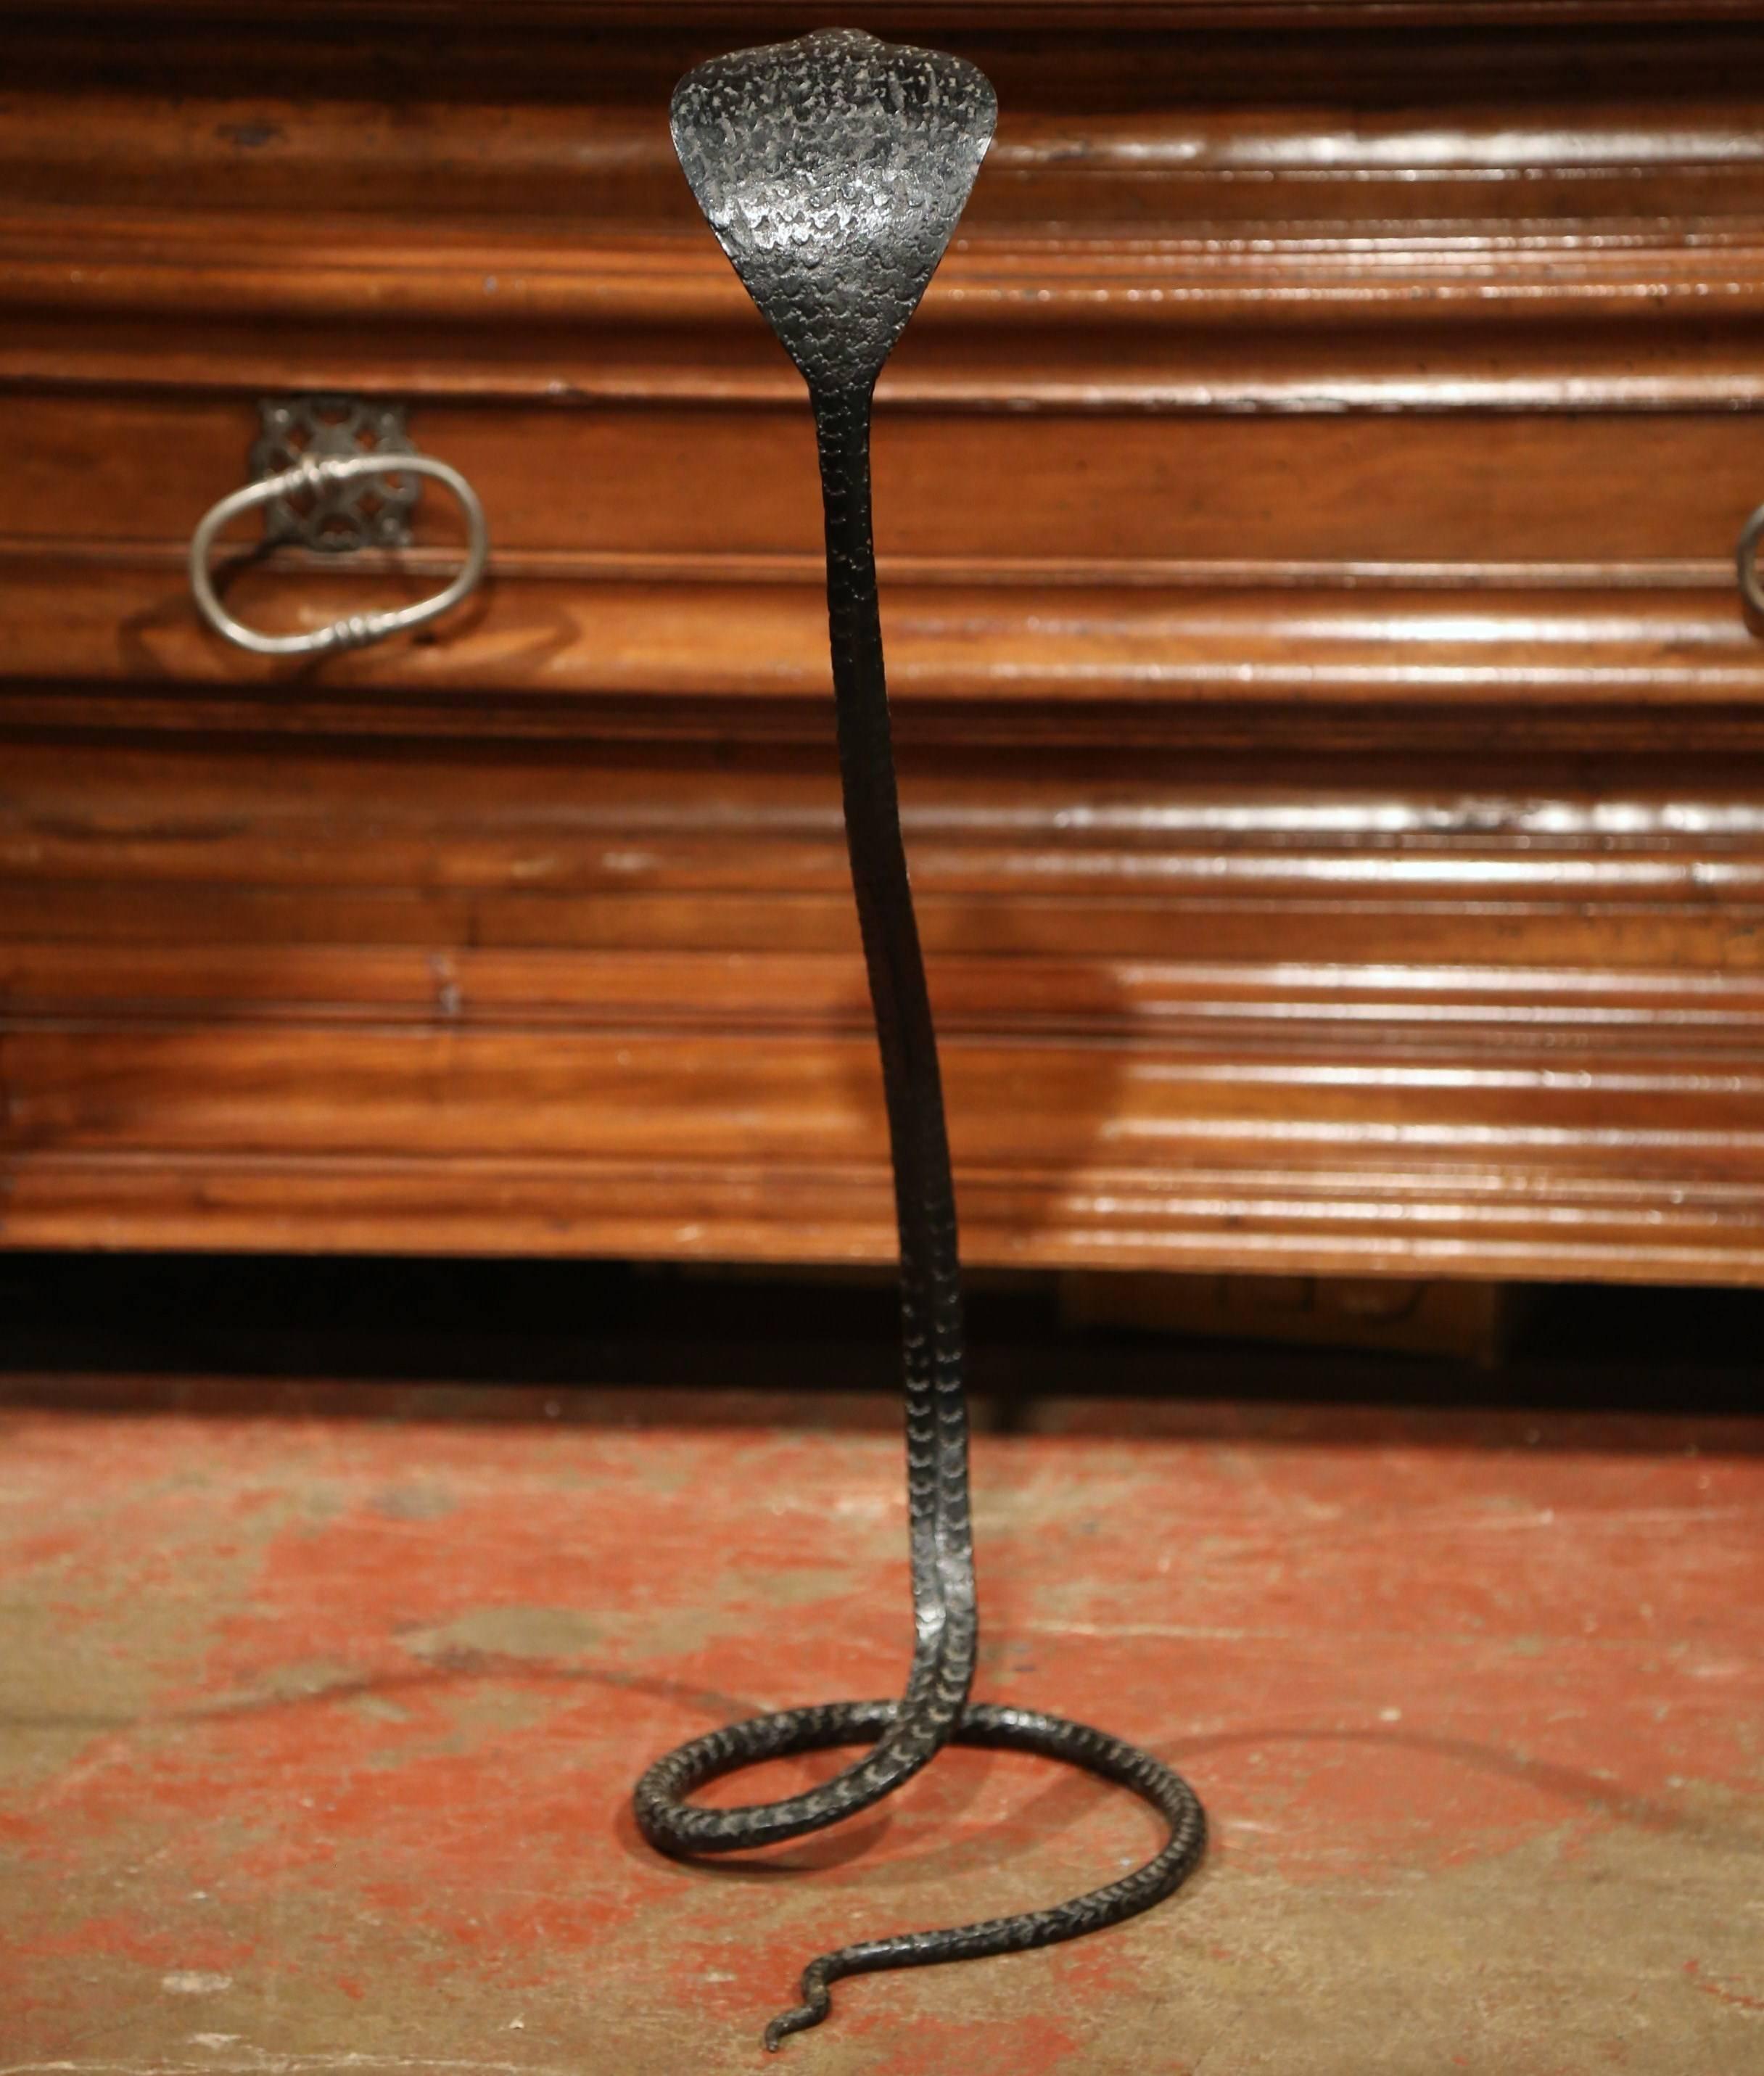 This interesting, decorative snake sculpture was forged in France, circa 1950. The simple sculpture features a rattle snake standing up. The piece is in excellent condition with wonderful iron work and rich black painted finish throughout. This